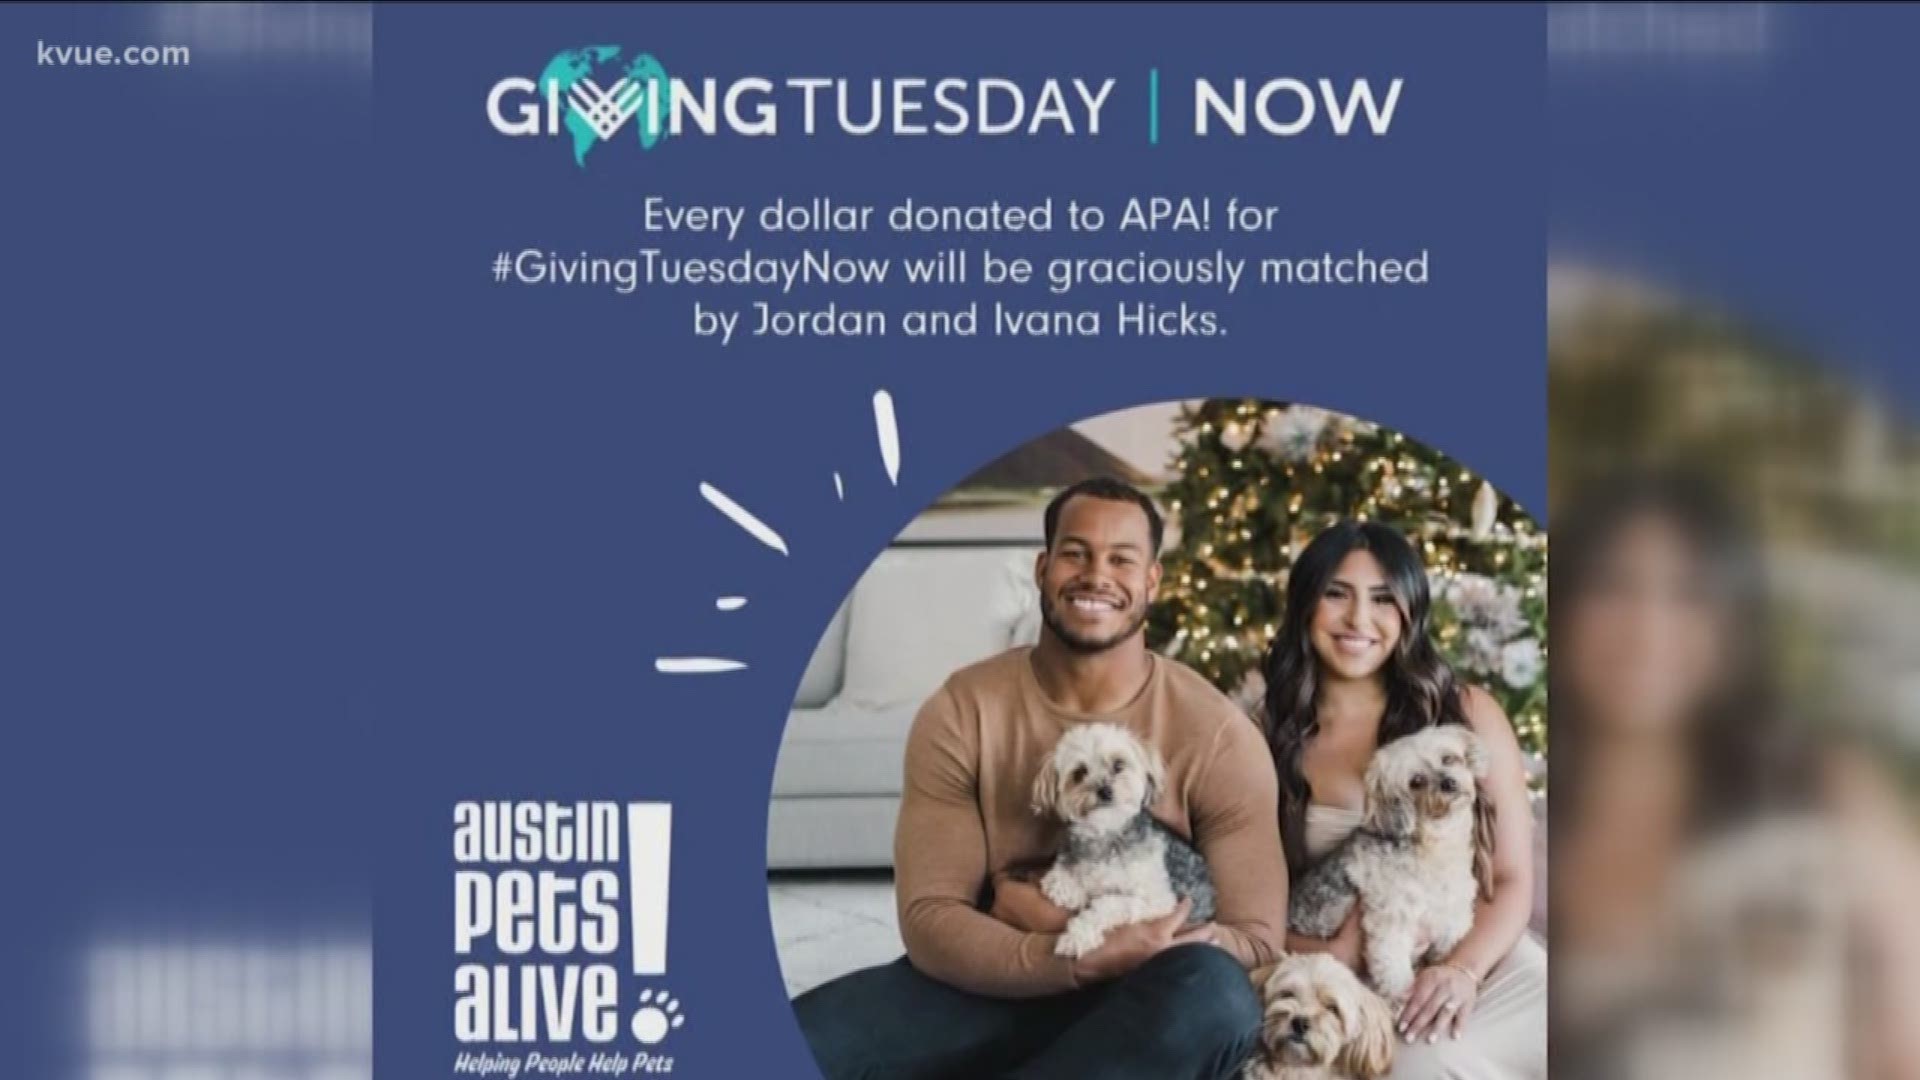 Jordan Hicks and wife, Ivana, matching $30K for Giving Tuesday